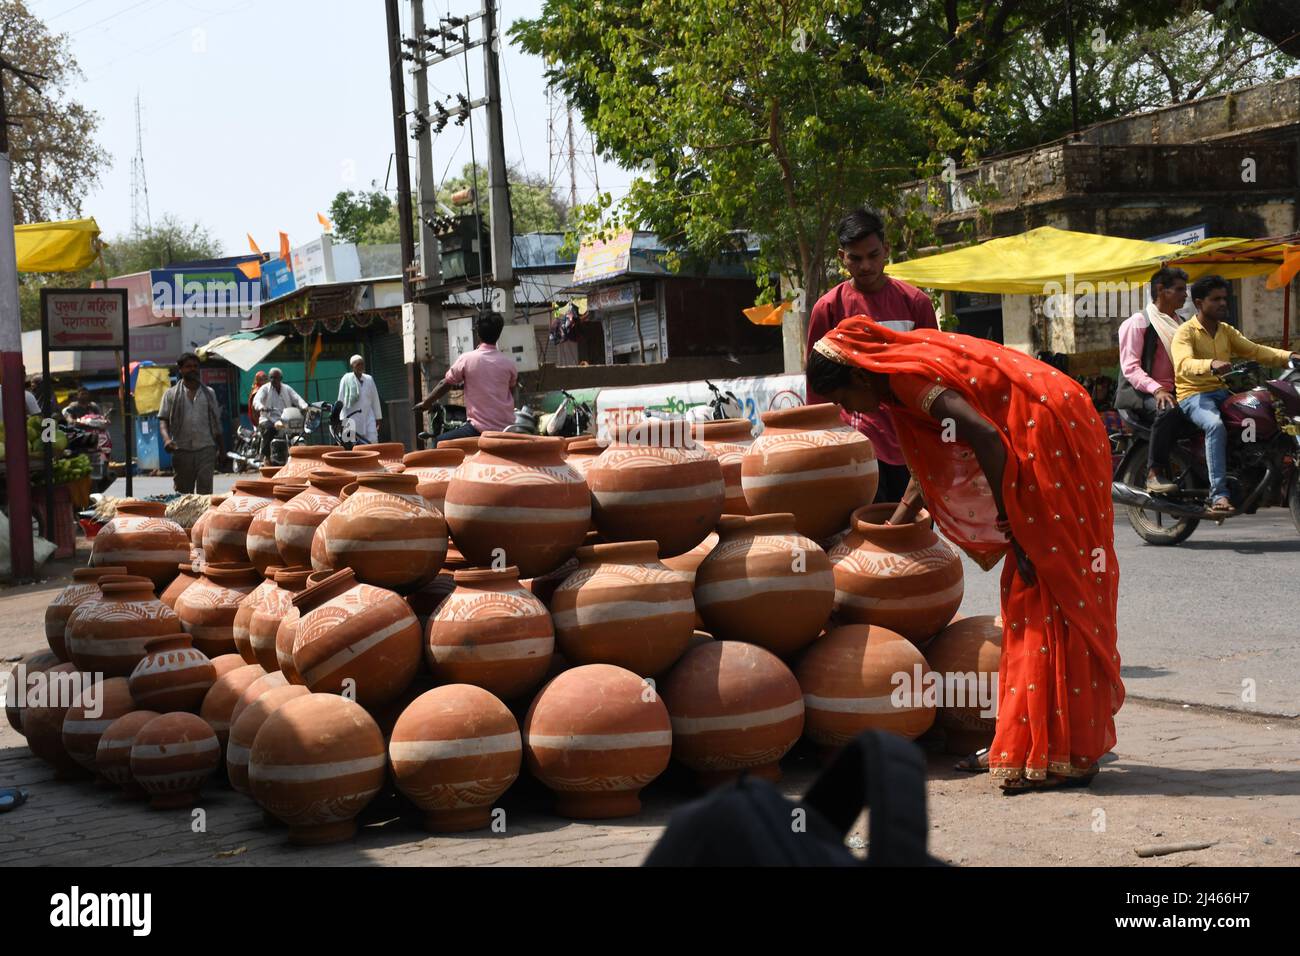 Chanderi Madhya Pradesh, India. 11th Apr, 2022. Earthen pots for sale on a hot day in Chanderi City, in Chanderi Madhya Pradesh, India on Apr. 11, 2022. (Photo by Ravi Batr/Sipa USA) Credit: Sipa USA/Alamy Live News Stock Photo